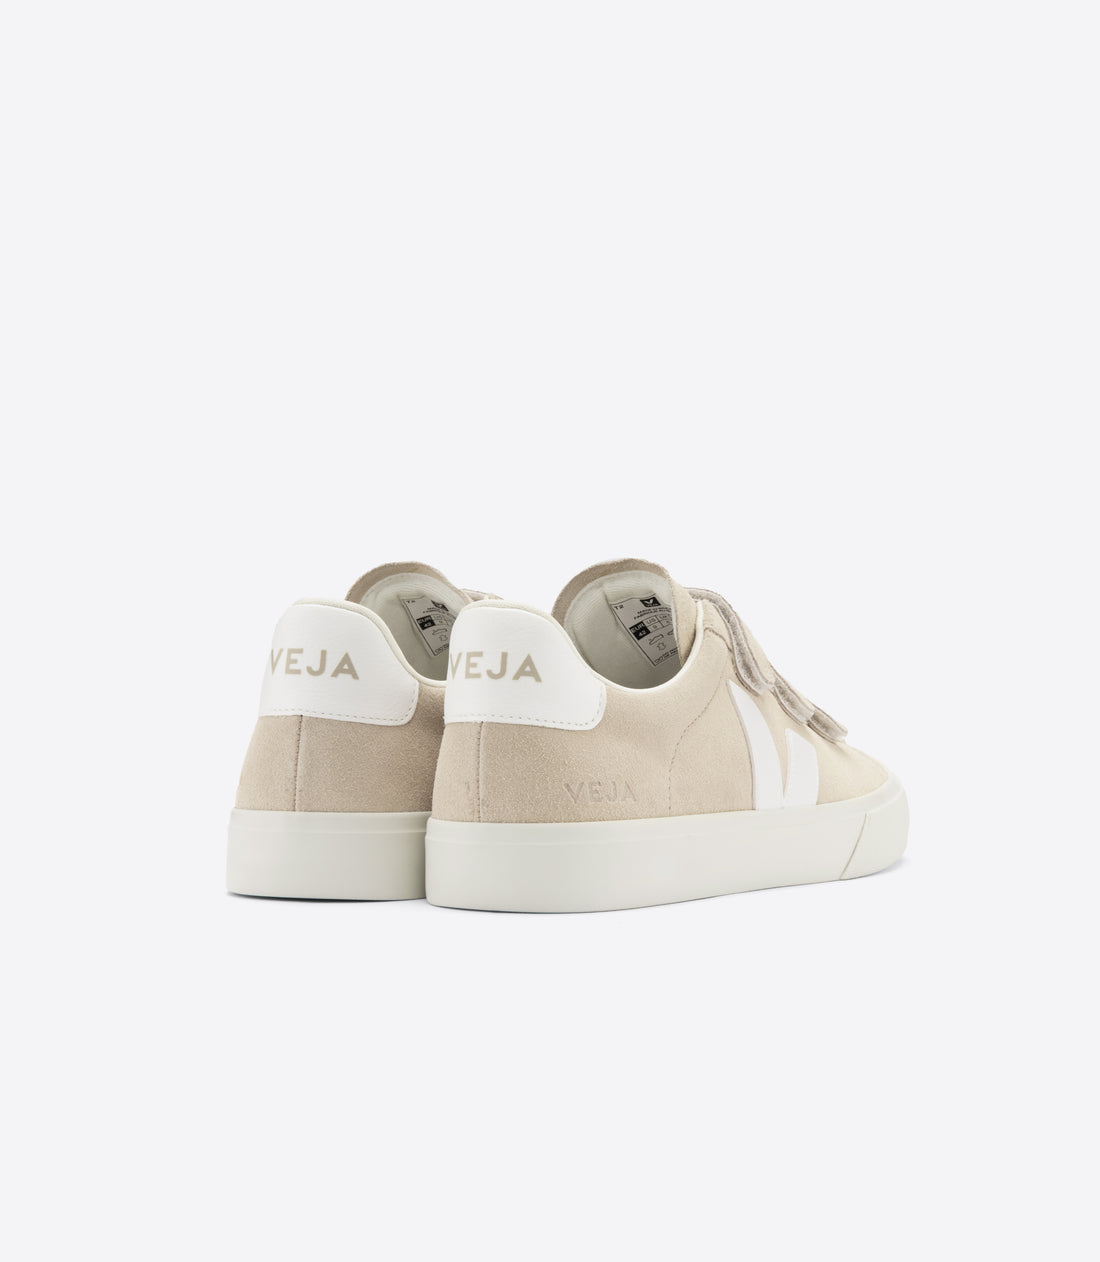 recife suede sneakers almond white